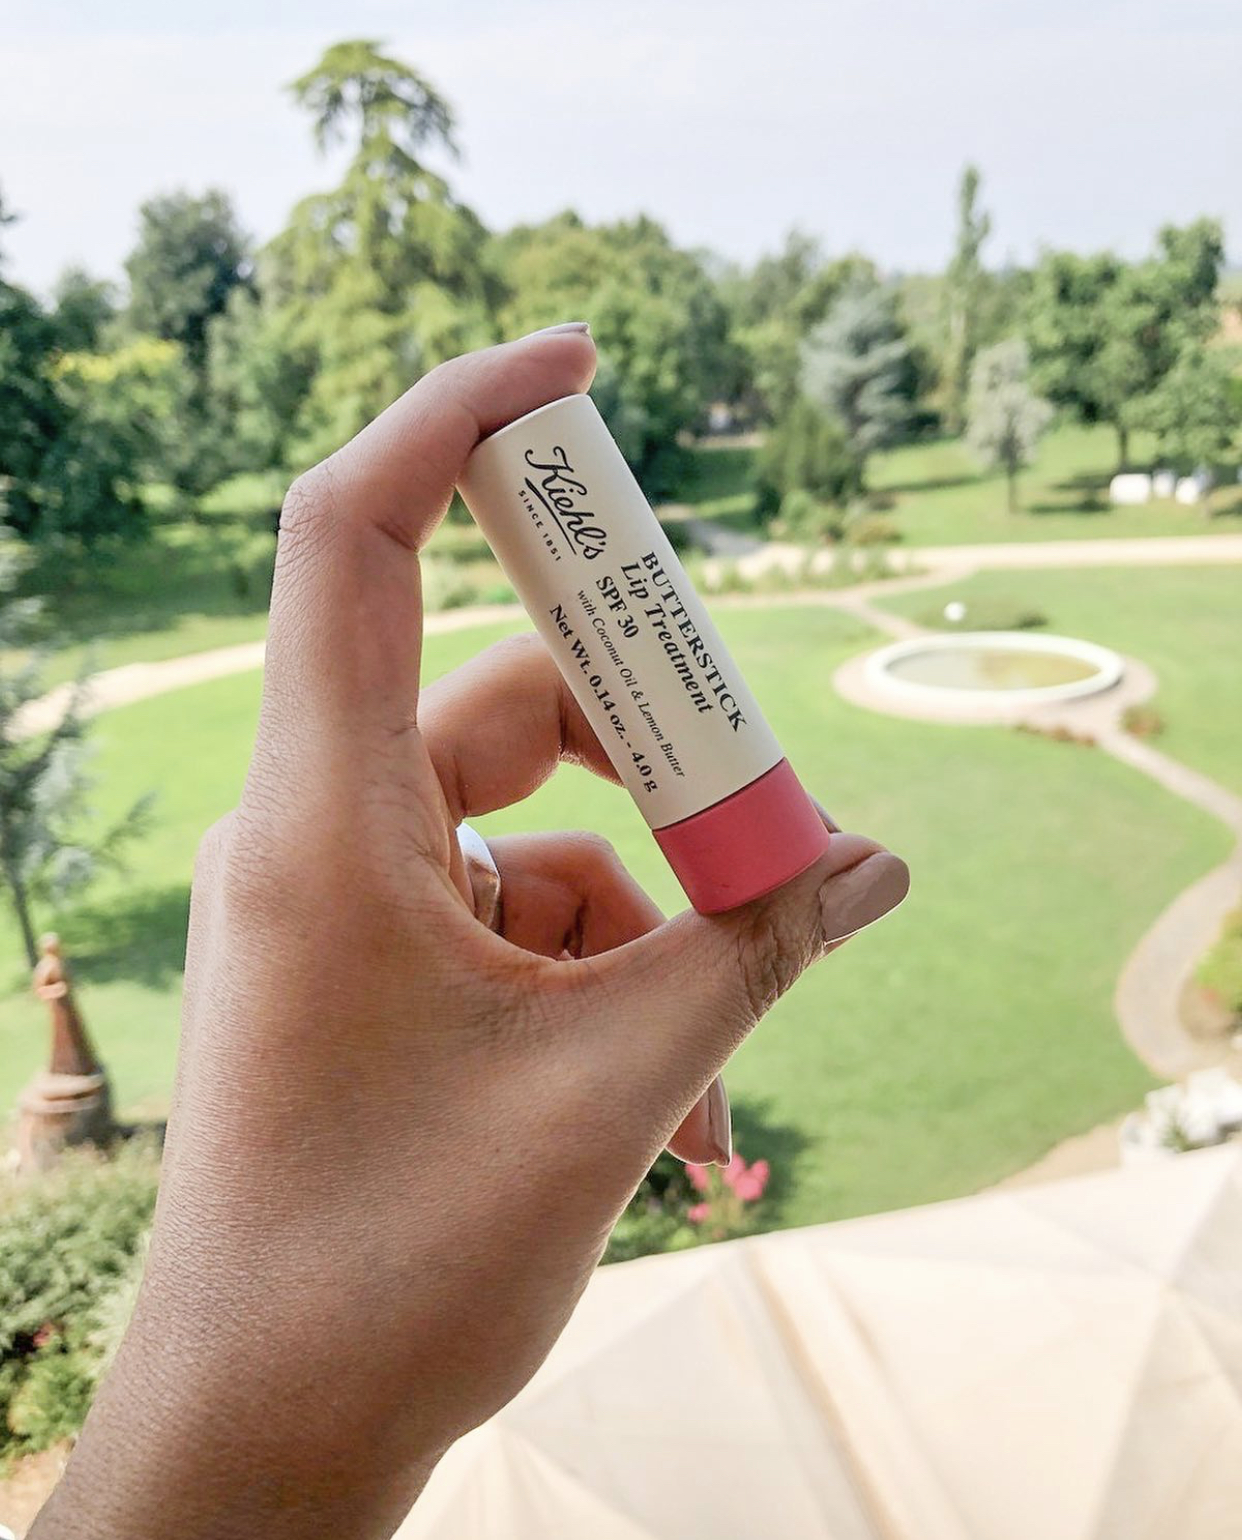 Are you using SPF on your lips too?